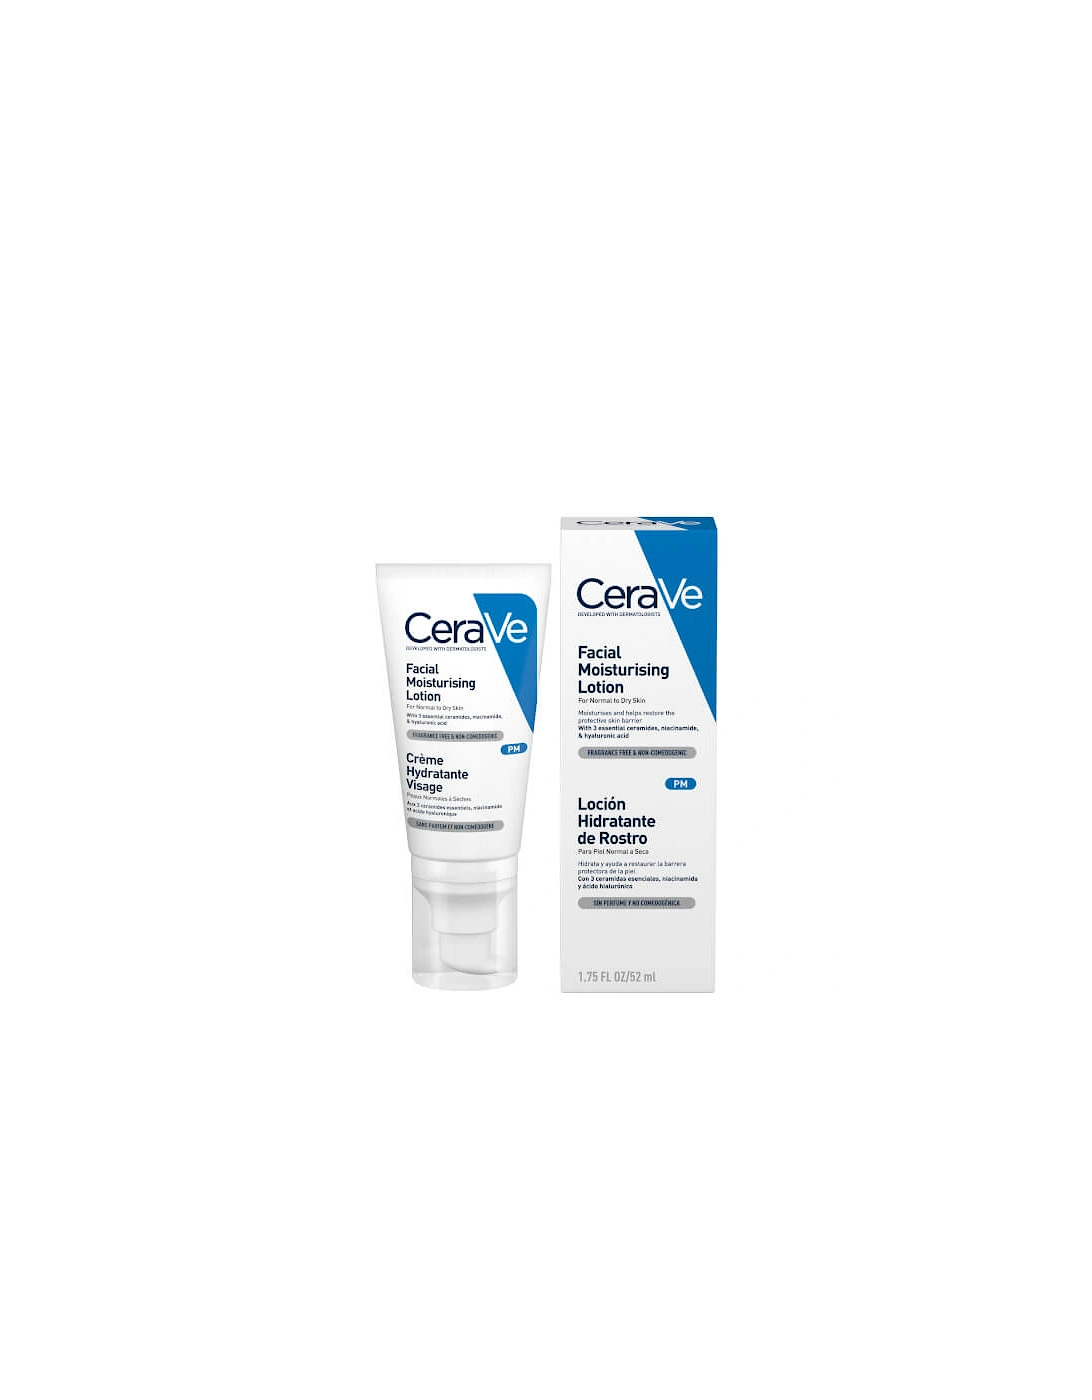 PM Facial Moisturising Lotion with Ceramides for Normal to Dry Skin 52ml - CeraVe, 2 of 1